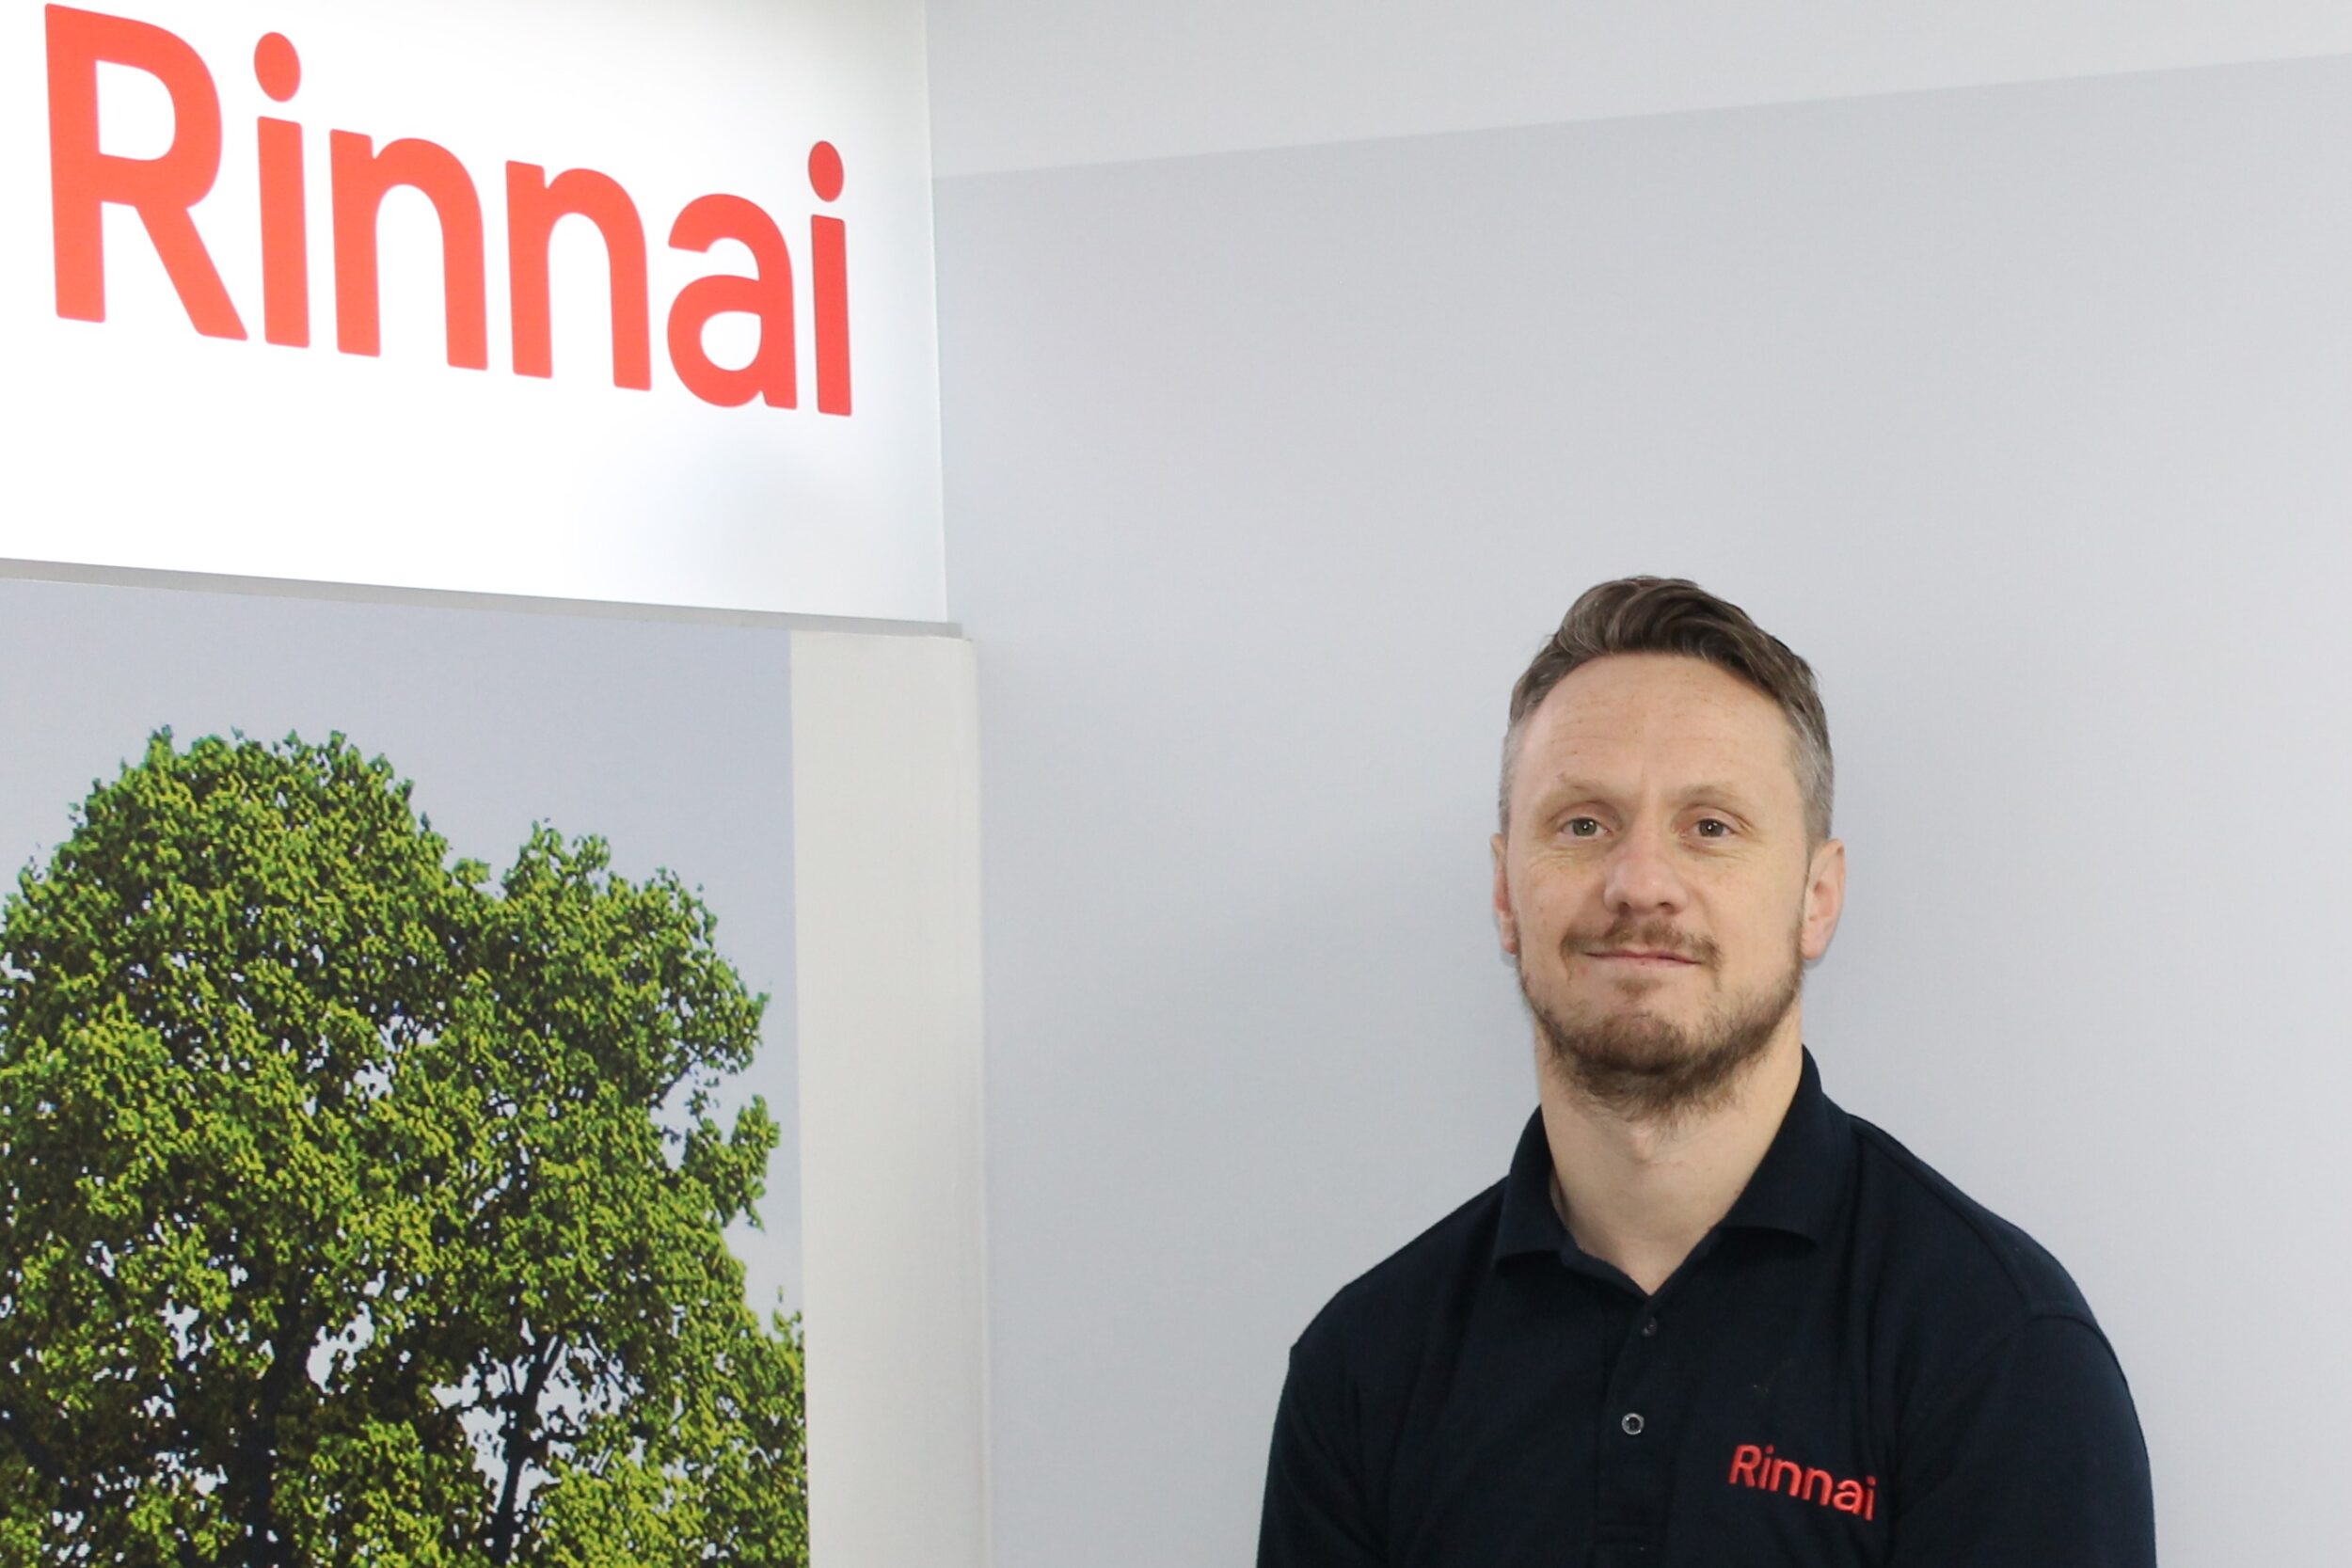 Rinnai report shows off-grid BioLPG can produce 81% Carbon savings